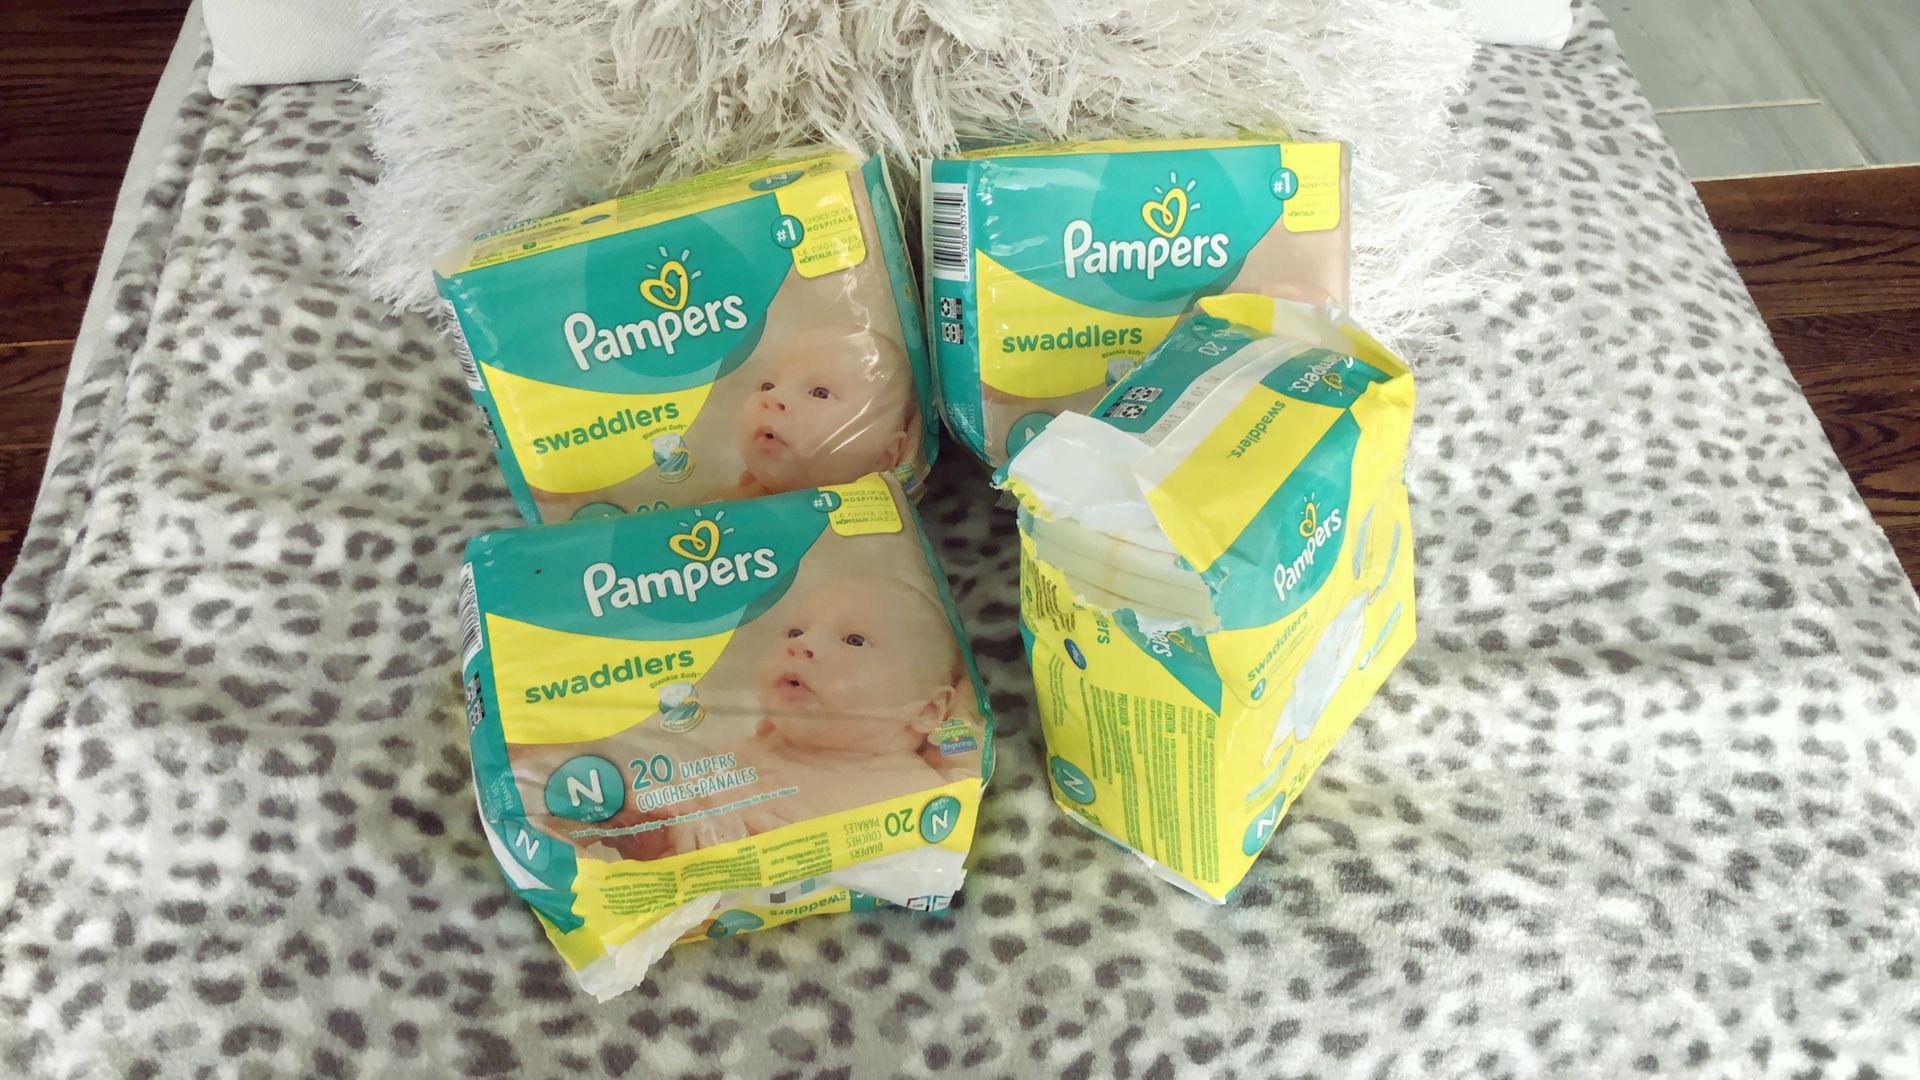 Pampers Swaddlers Diapers, Newborn (Up to 10 lbs.), Total 80